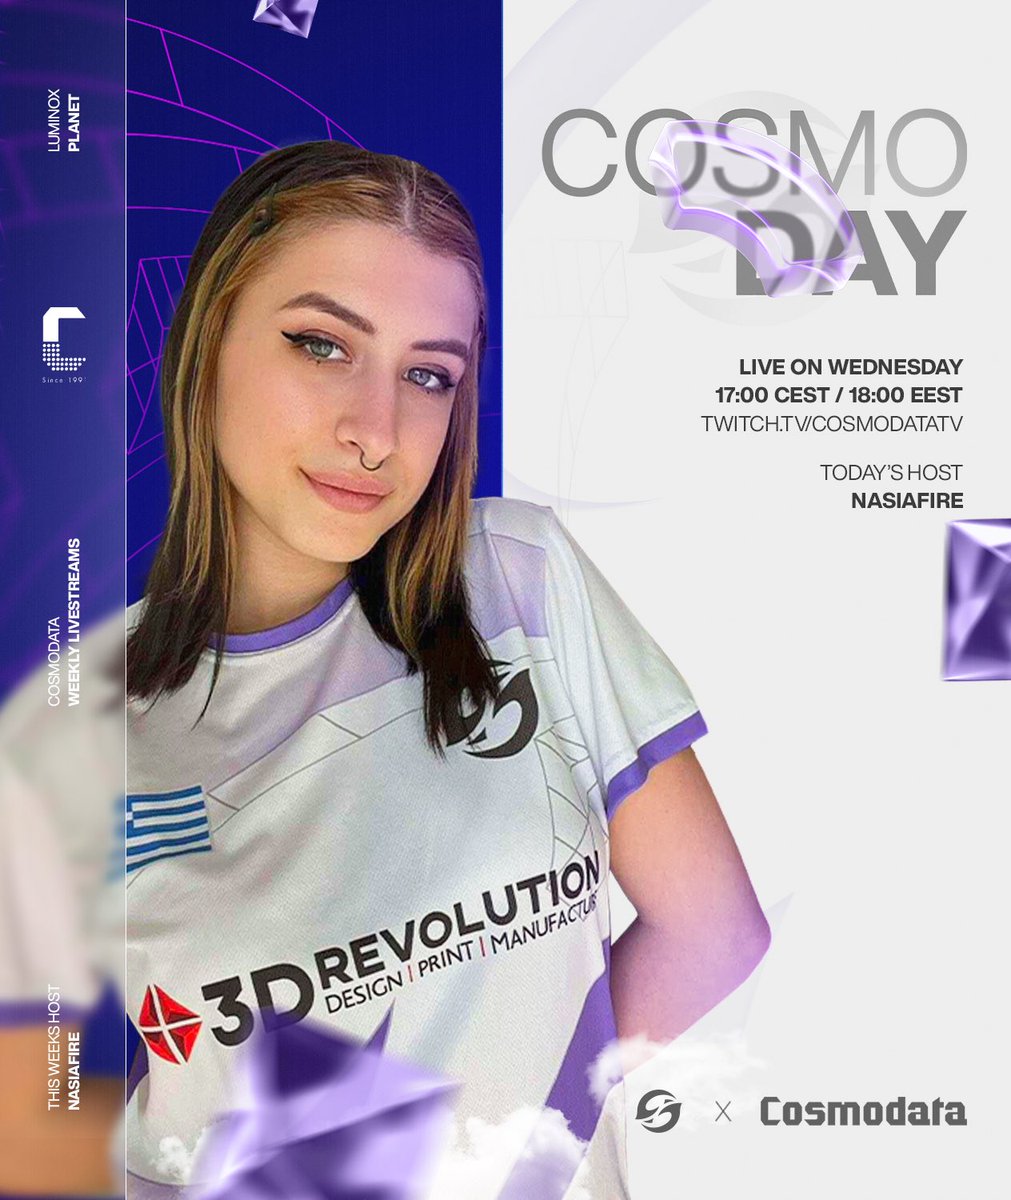 GET READY FOR TODAY'S STREAM 🥳 Content Creator - @NasiaFire_ 📺 - twitch.tv/cosmodatatv ⏰ - LIVE NOW @cosmodata